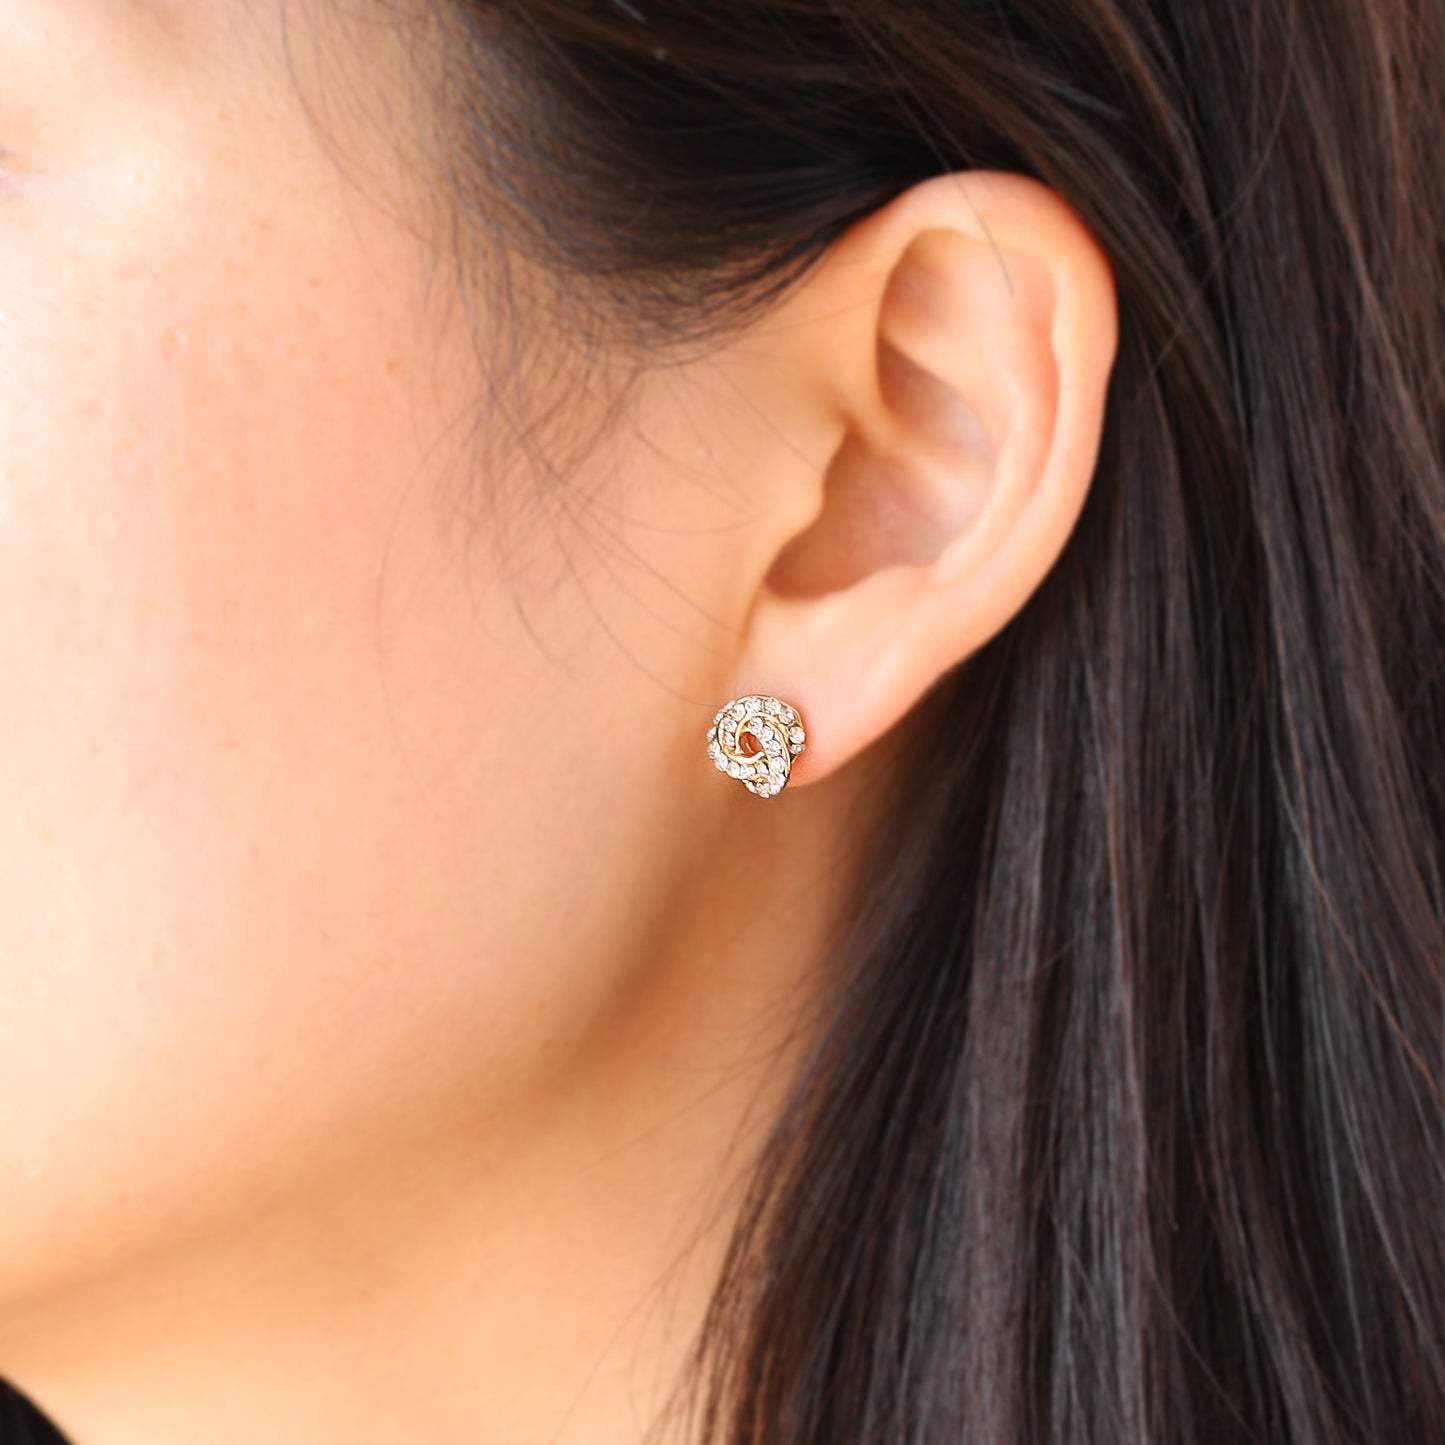 Pave CZ Spiral Earrings - 14K Gold Filled